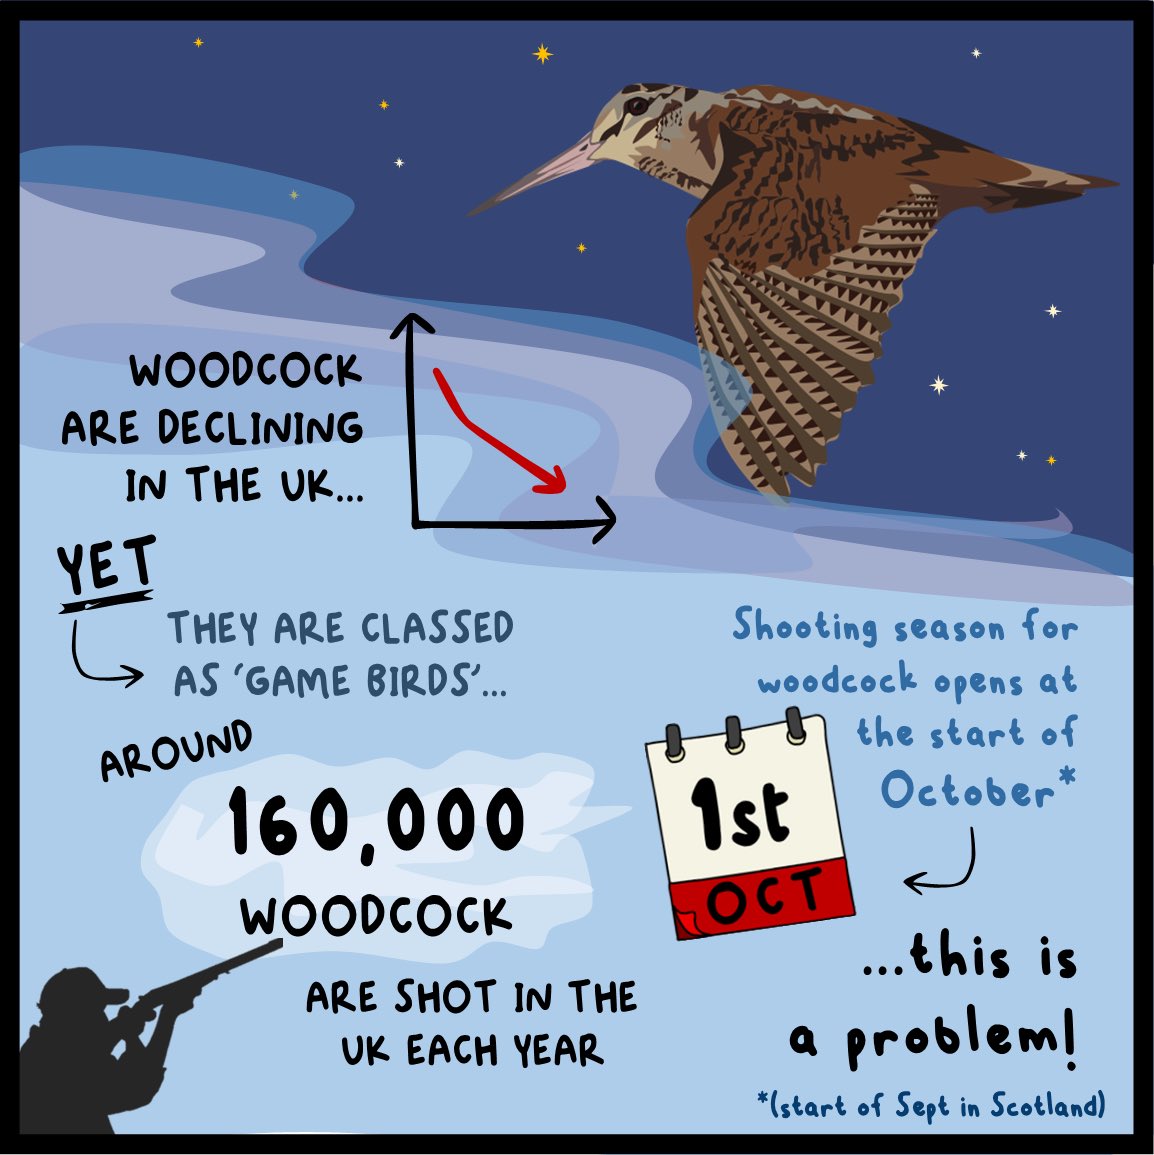 Today the @WildJustice_org woodcock petition hit 45,000 signatures! Lets get it to 50K and keep putting on the pressure to protect this beautiful species 😃 petition.parliament.uk/petitions/6196…